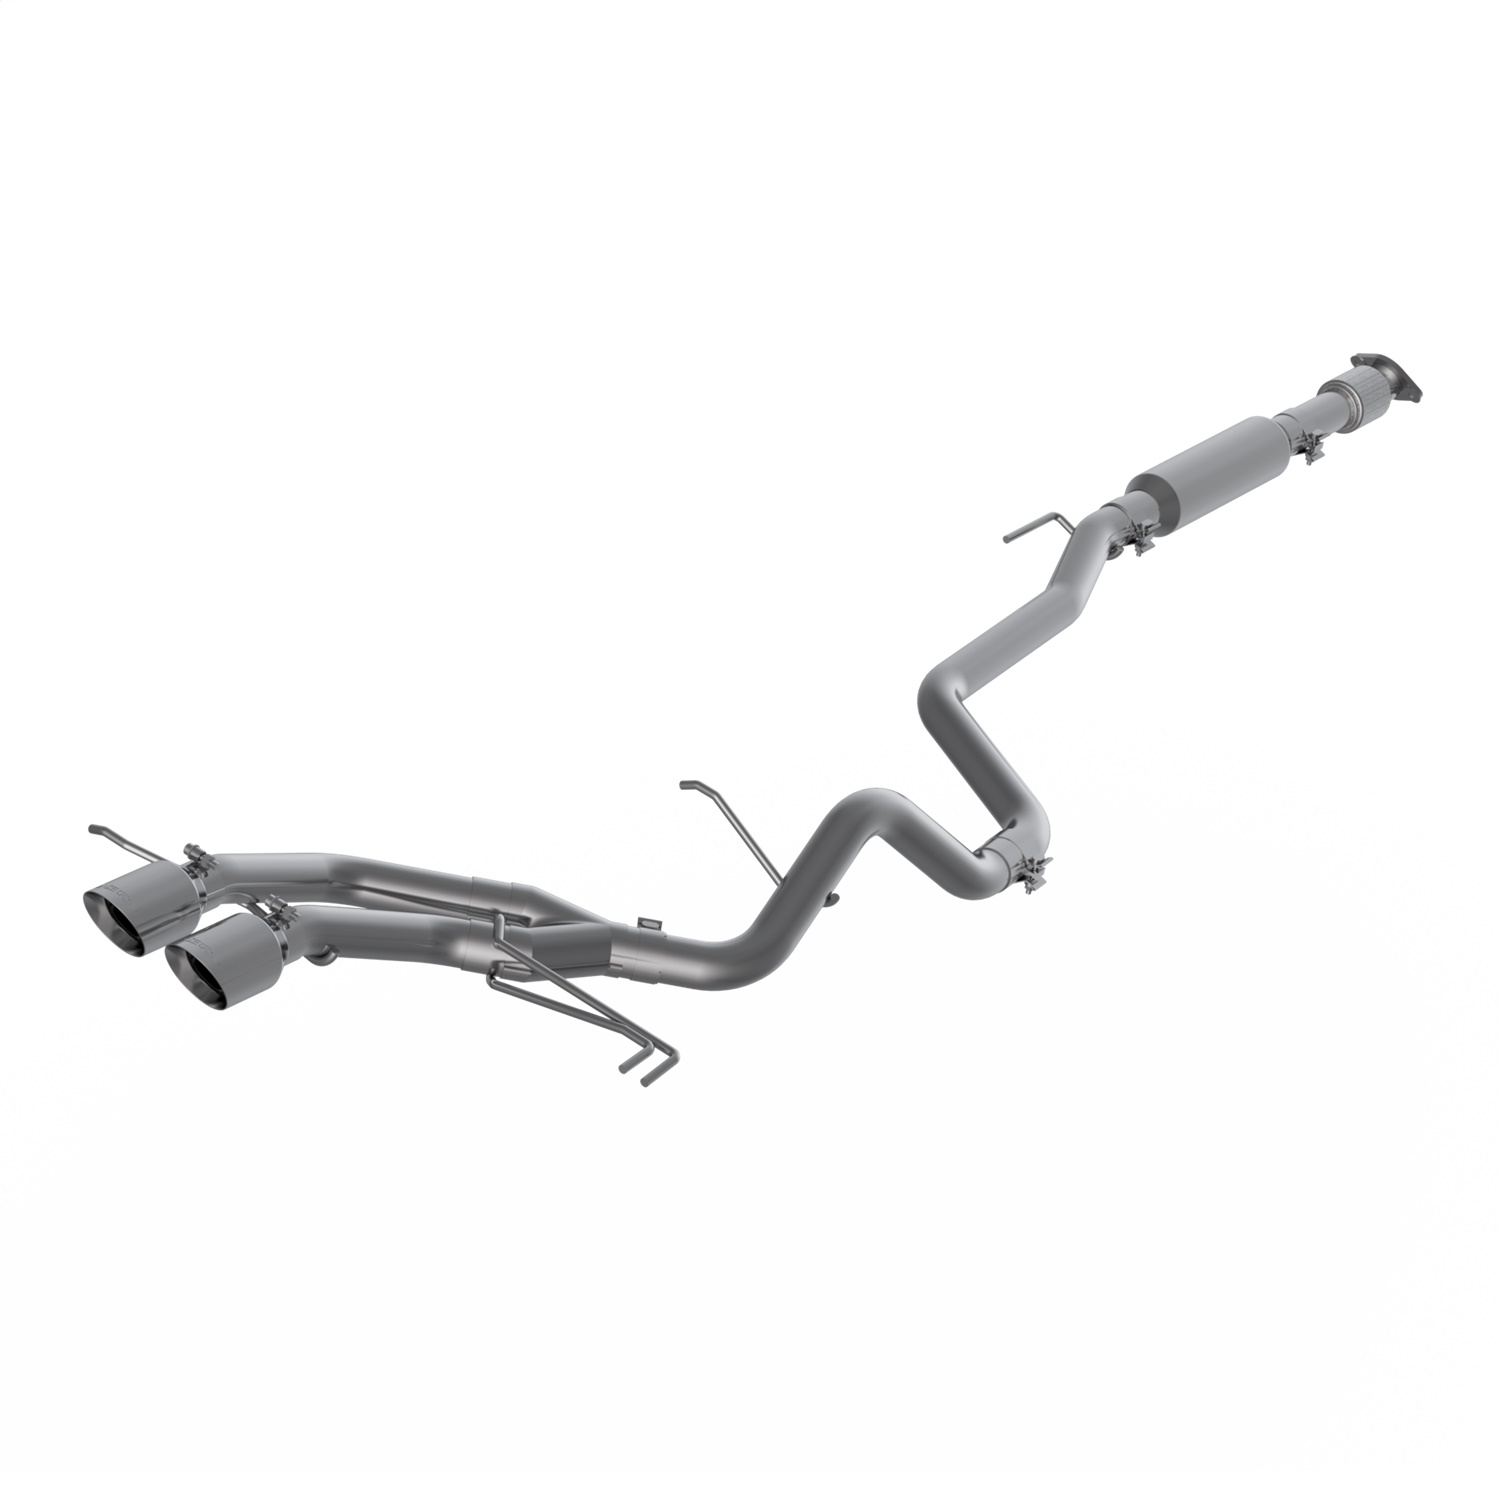 MBRP Exhaust S4703304 Armor Pro Cat Back Exhaust System Fits 13-17 Veloster